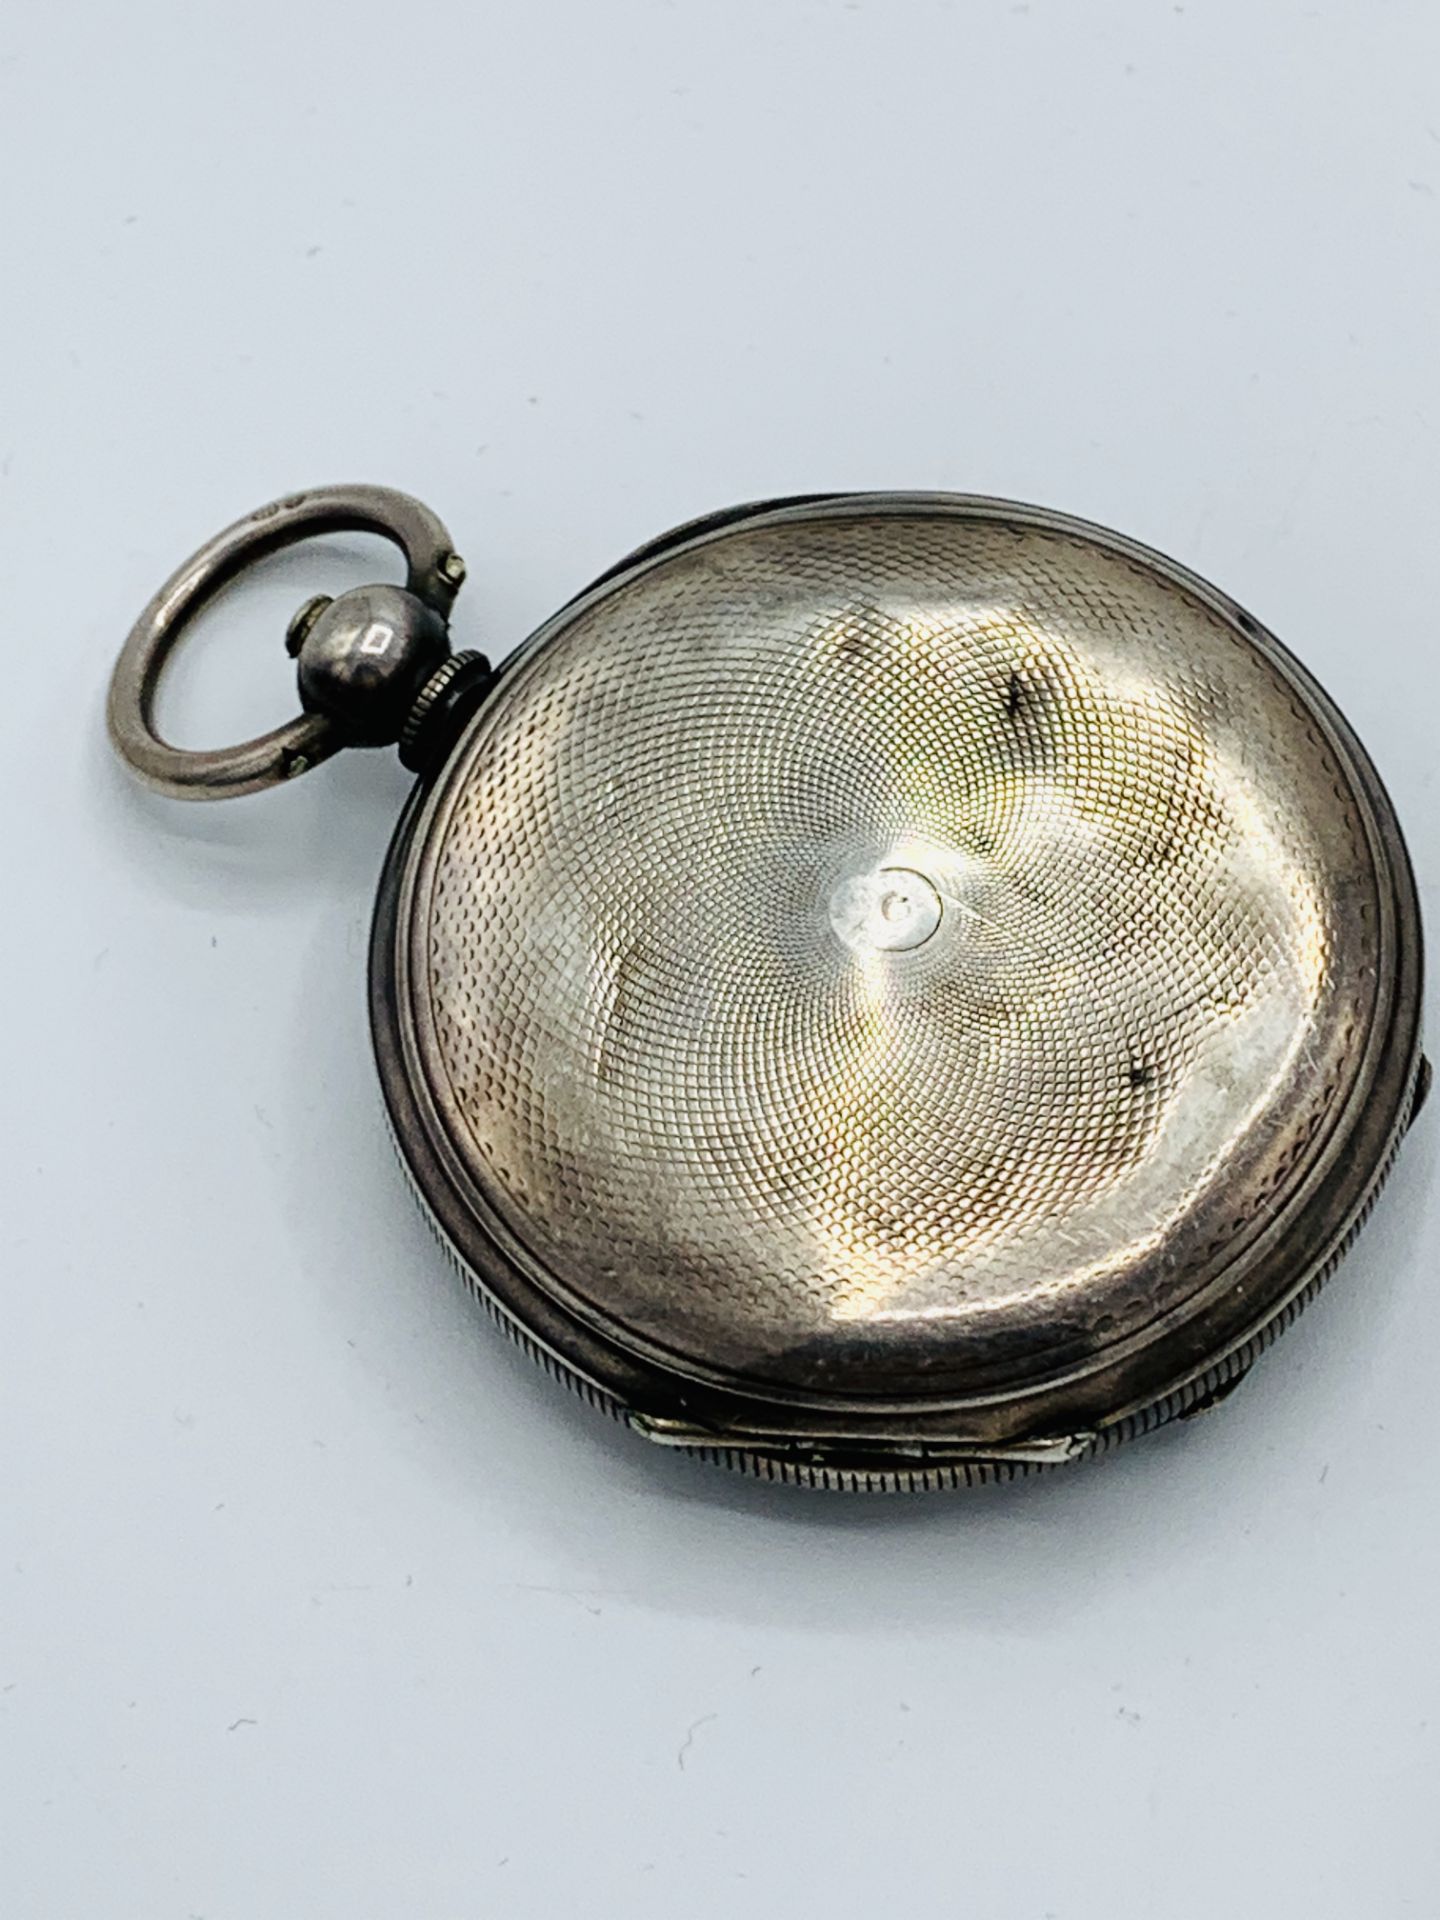 Silver case pocket watch marked The Veracity Watch, Masters Ltd., Rye; and 3 other pocket watches - Image 5 of 6